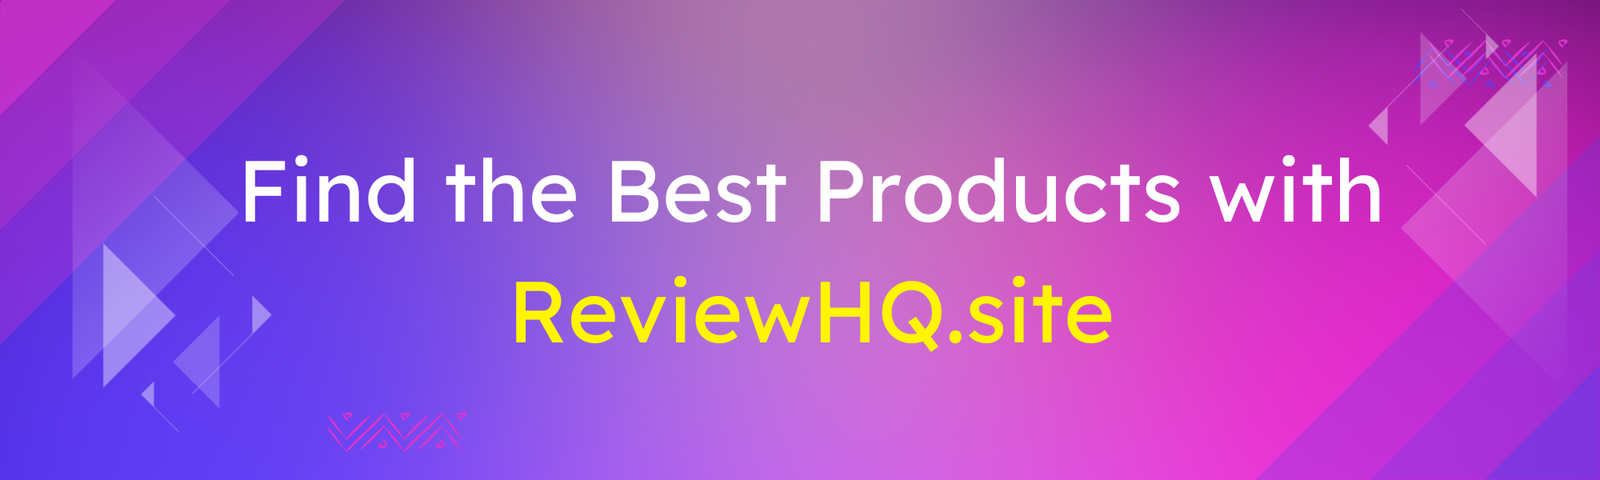 ReviewHQ.site: Your Destination for Informed Product DecisionsReviewHQ.site: Your Destination for Informed Product Decisions